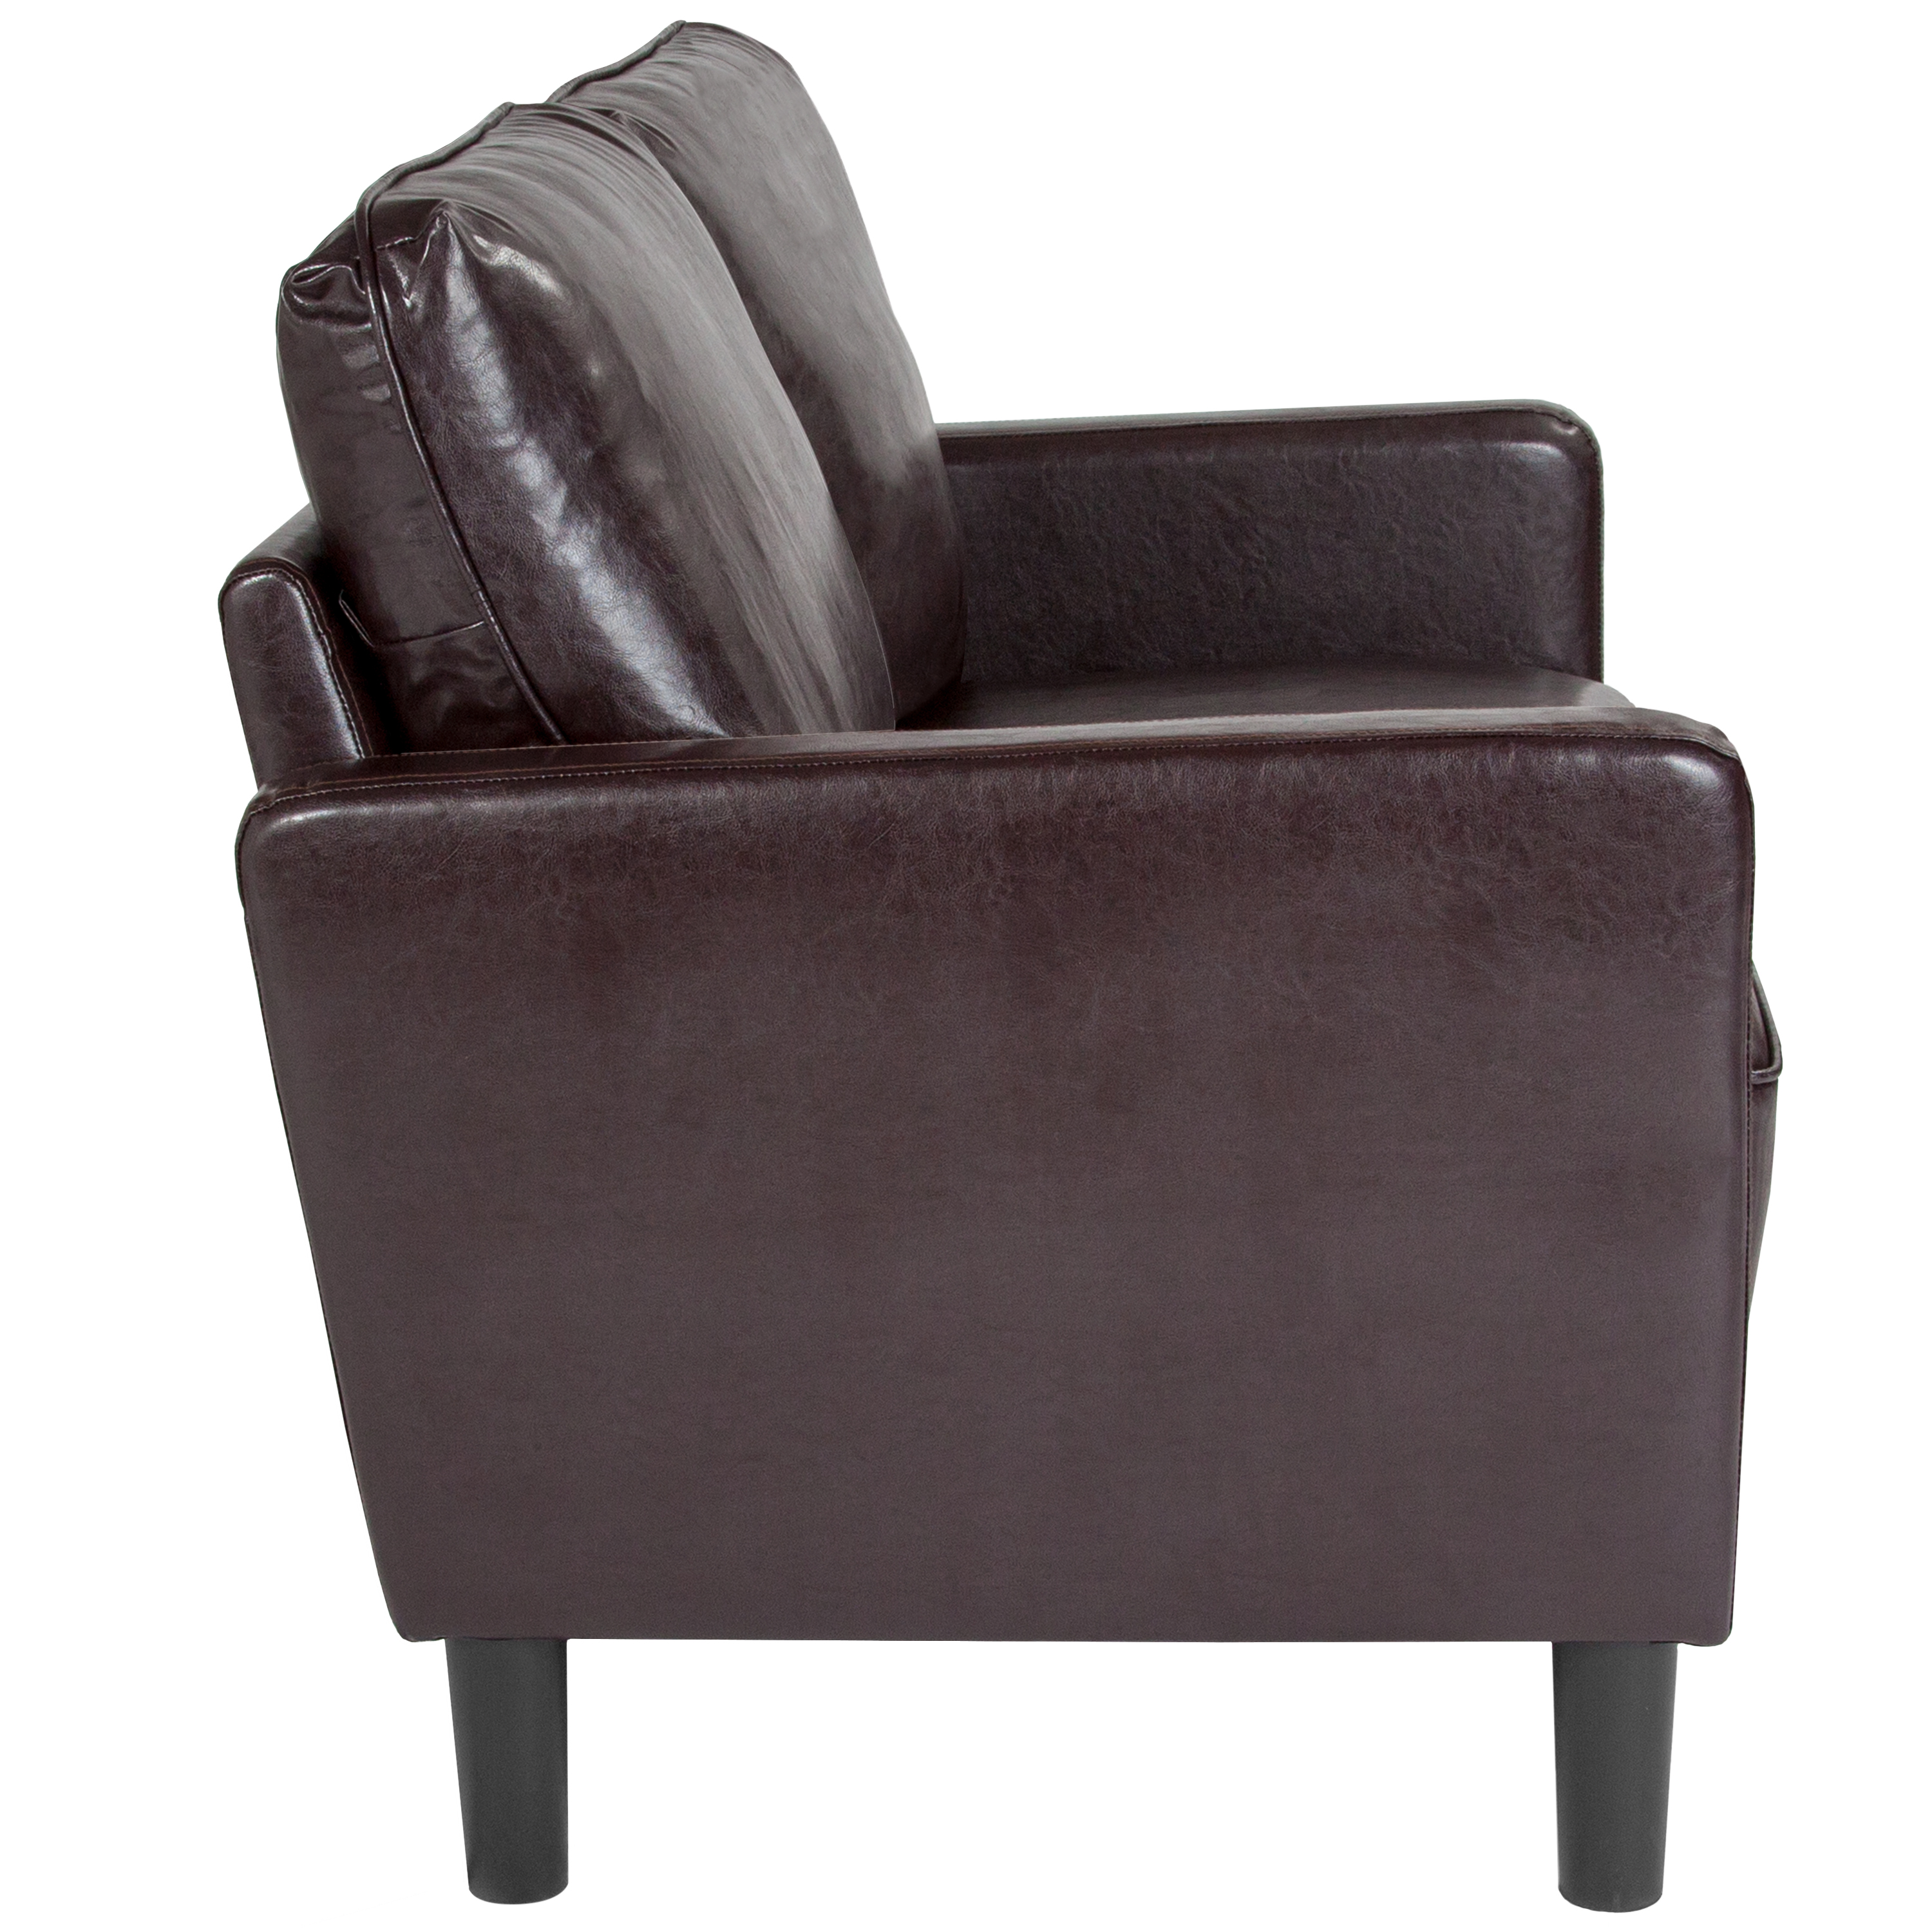 Flash Furniture Washington Park Upholstered Loveseat in Brown LeatherSoft - image 4 of 5